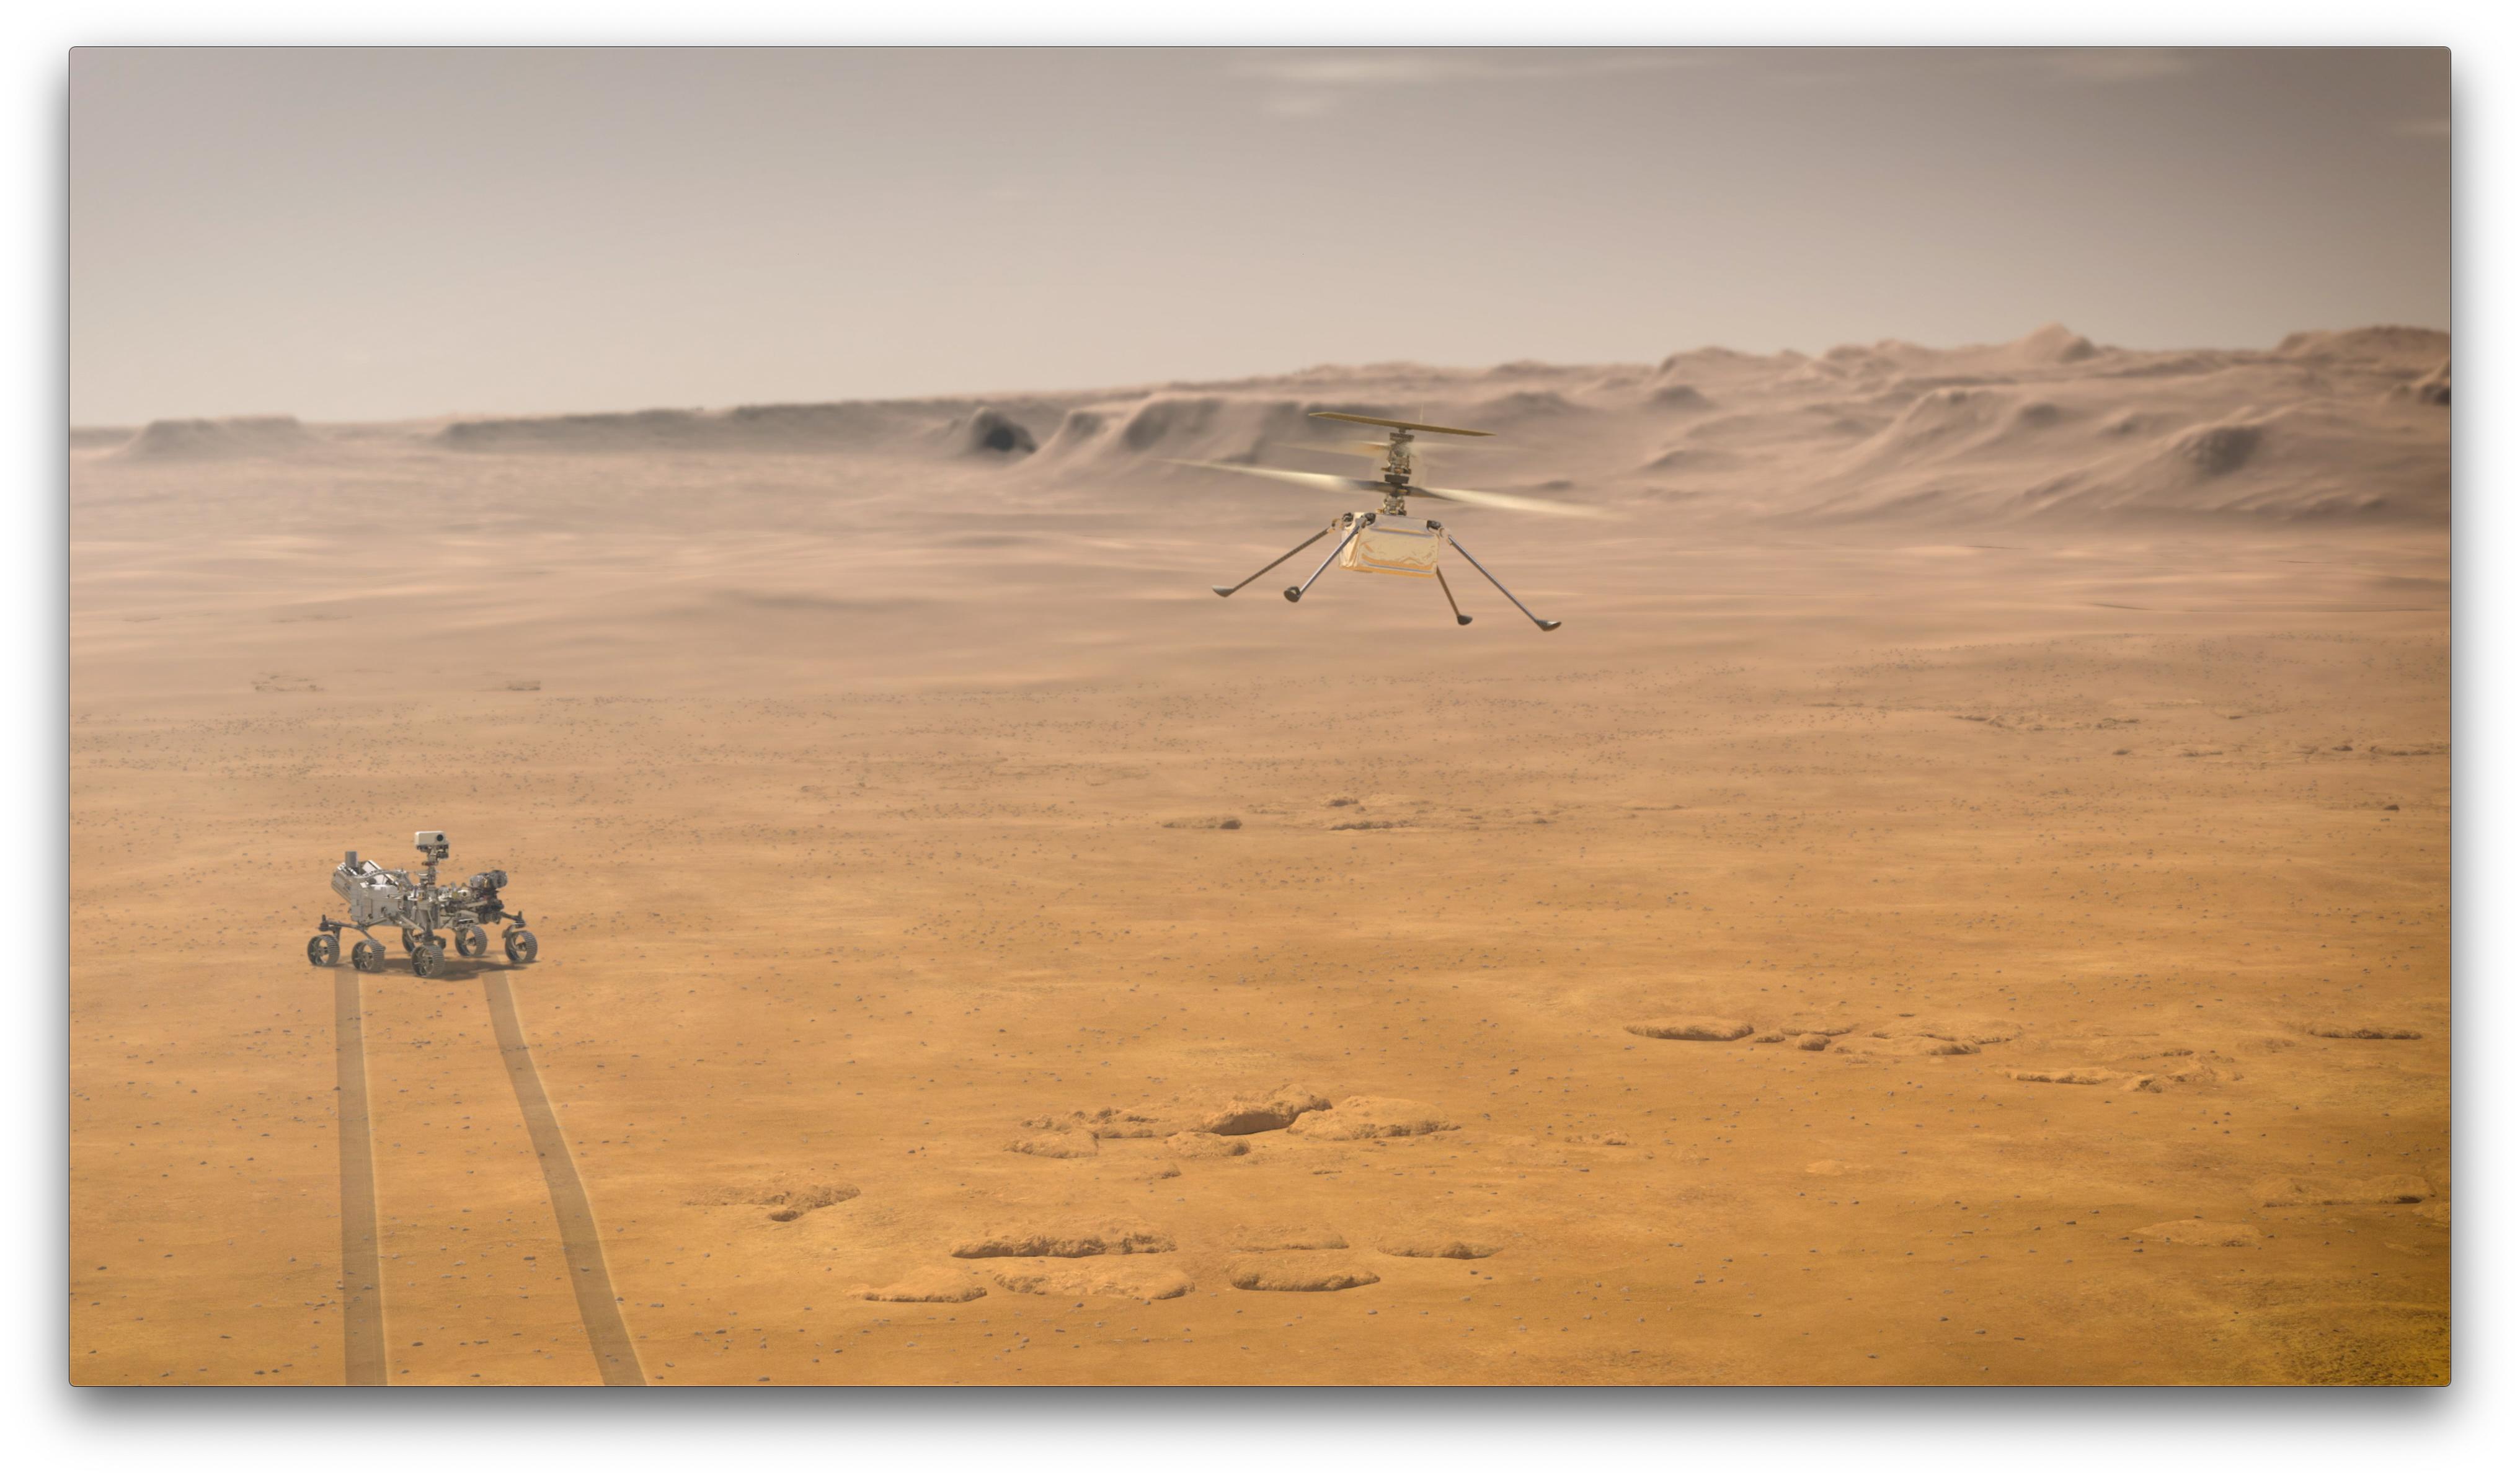 PIA23963: A Mars Rover and a Mars Flyer (Artist's Concept)